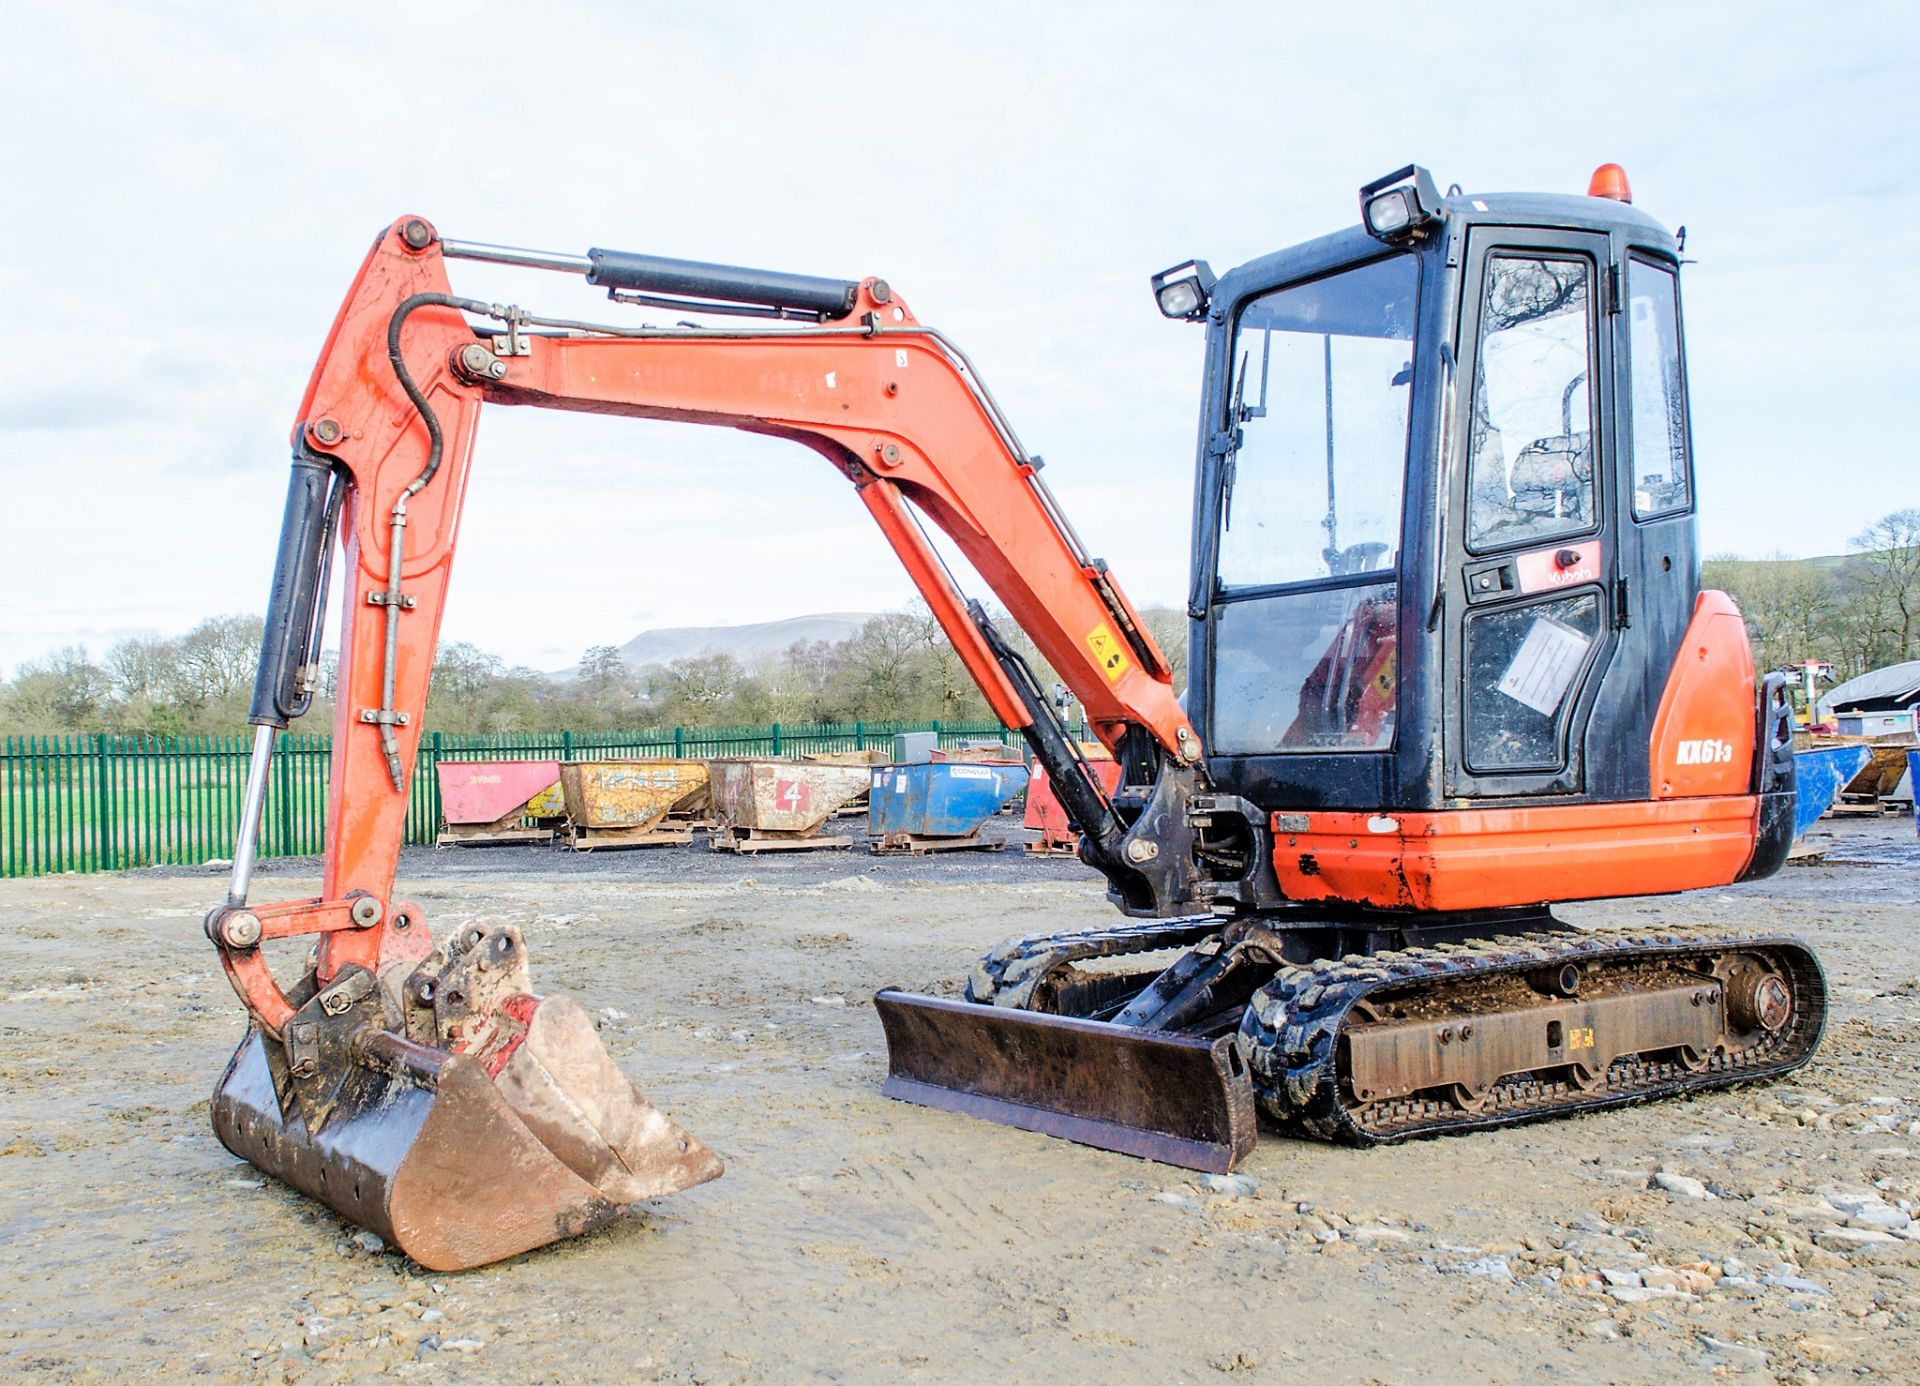 Kubota KX61-3 2.6 tonne rubber tracked excavator Year: 2013 S/N: 80076 Recorded Hours: 3184 blade,